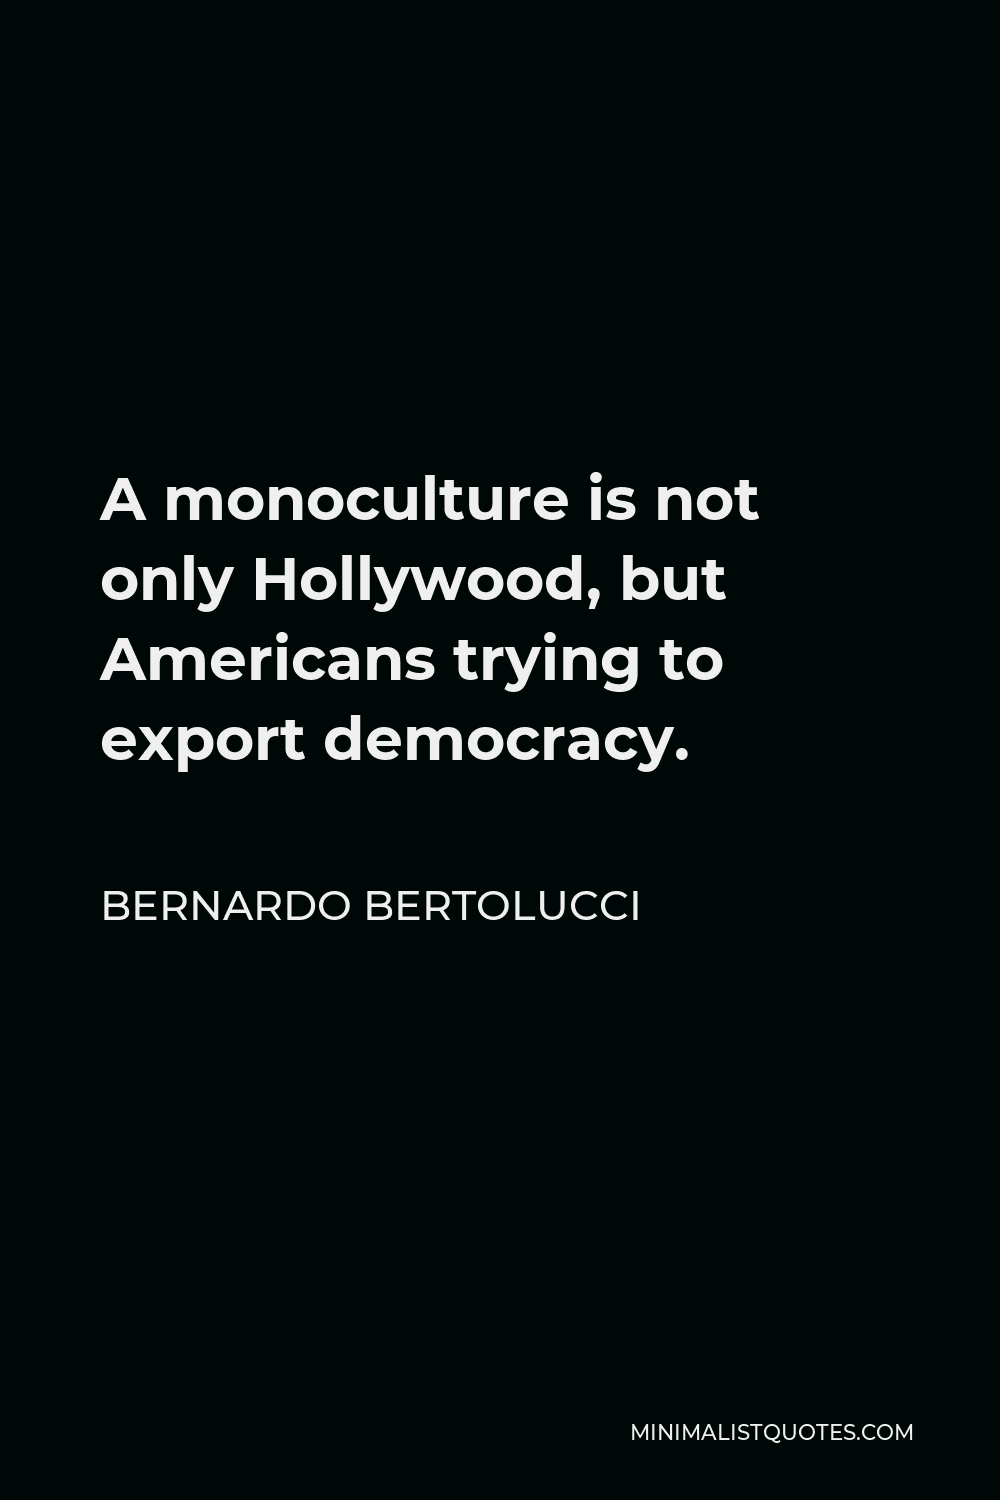 Bernardo Bertolucci Quote - A monoculture is not only Hollywood, but Americans trying to export democracy.